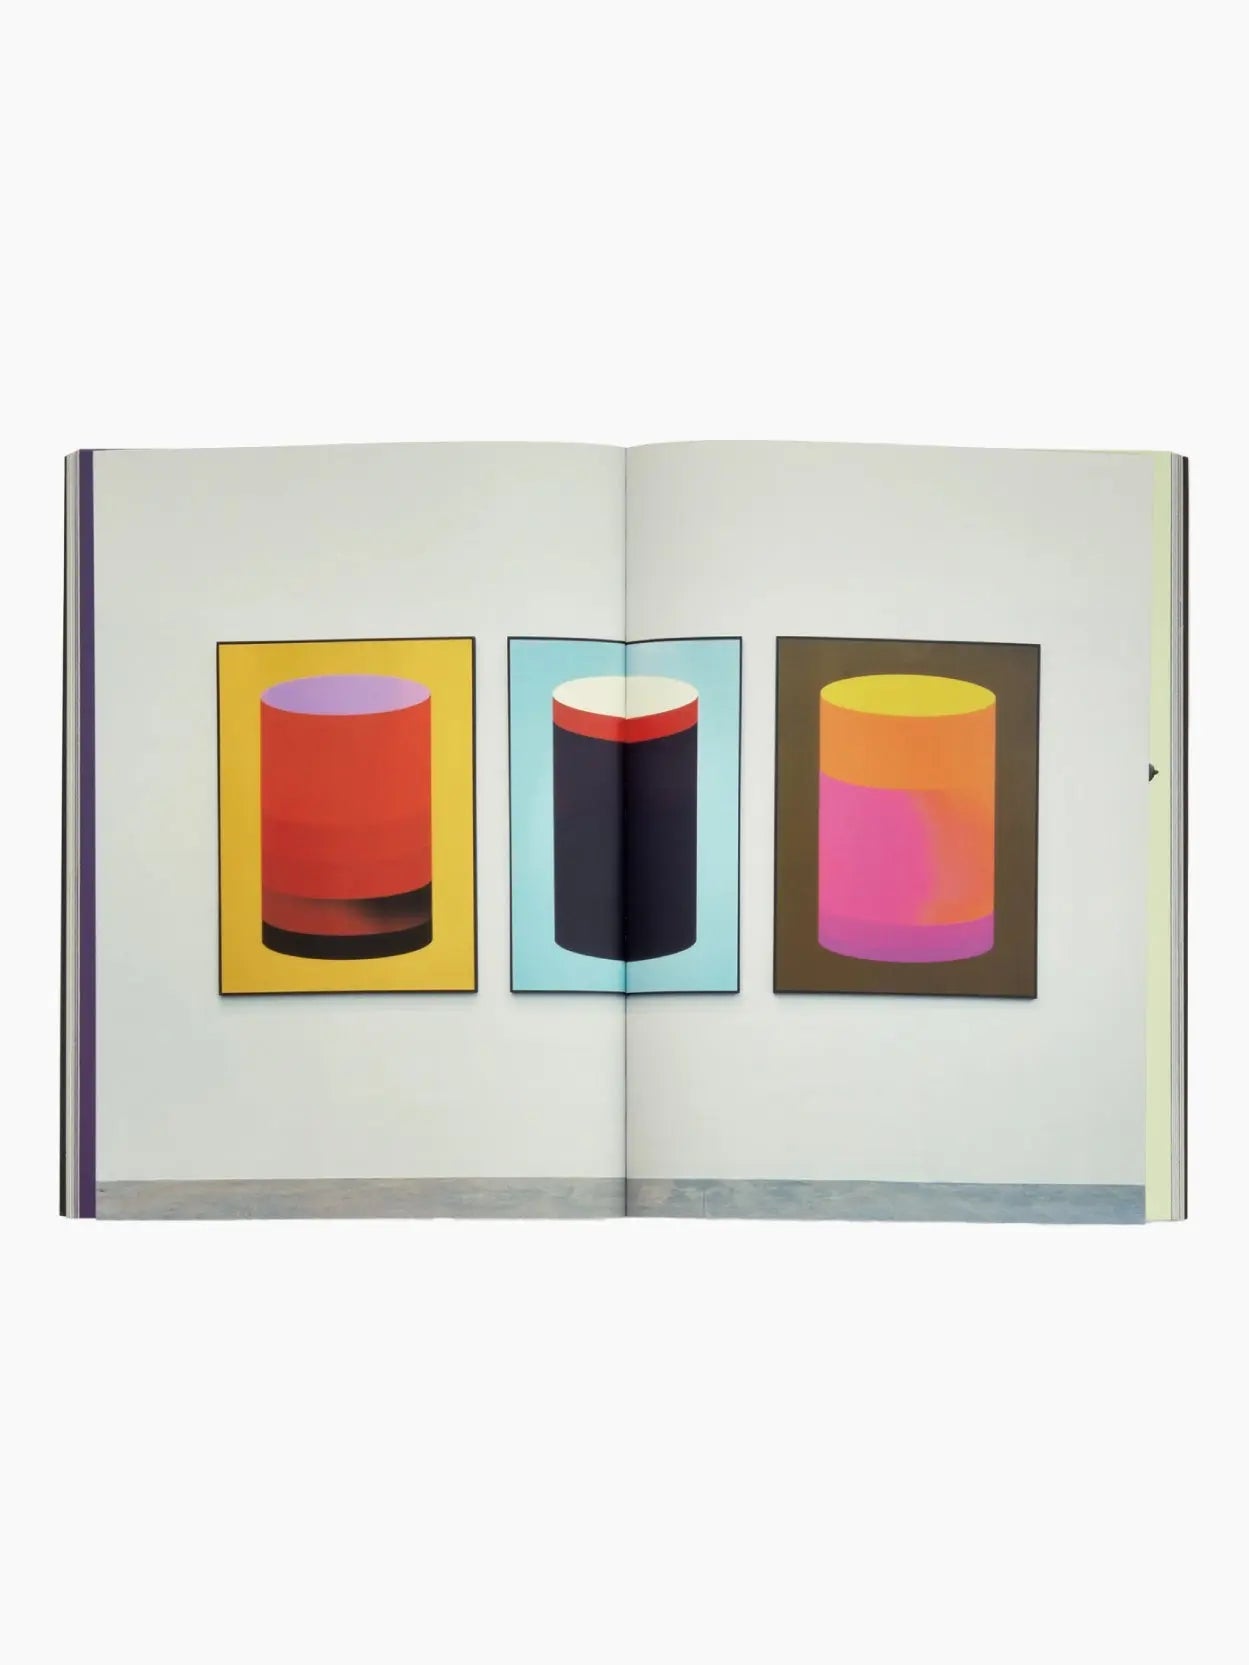 A book titled "Stefan Sagmeister: Now Is Better" by Phaidon stands upright against a white background. Its cover features artwork of a classical painting overlaid with graphic shapes: a blue cylinder, a yellow circle, and a red semicircular shape. Available at Bassalstore in Barcelona.